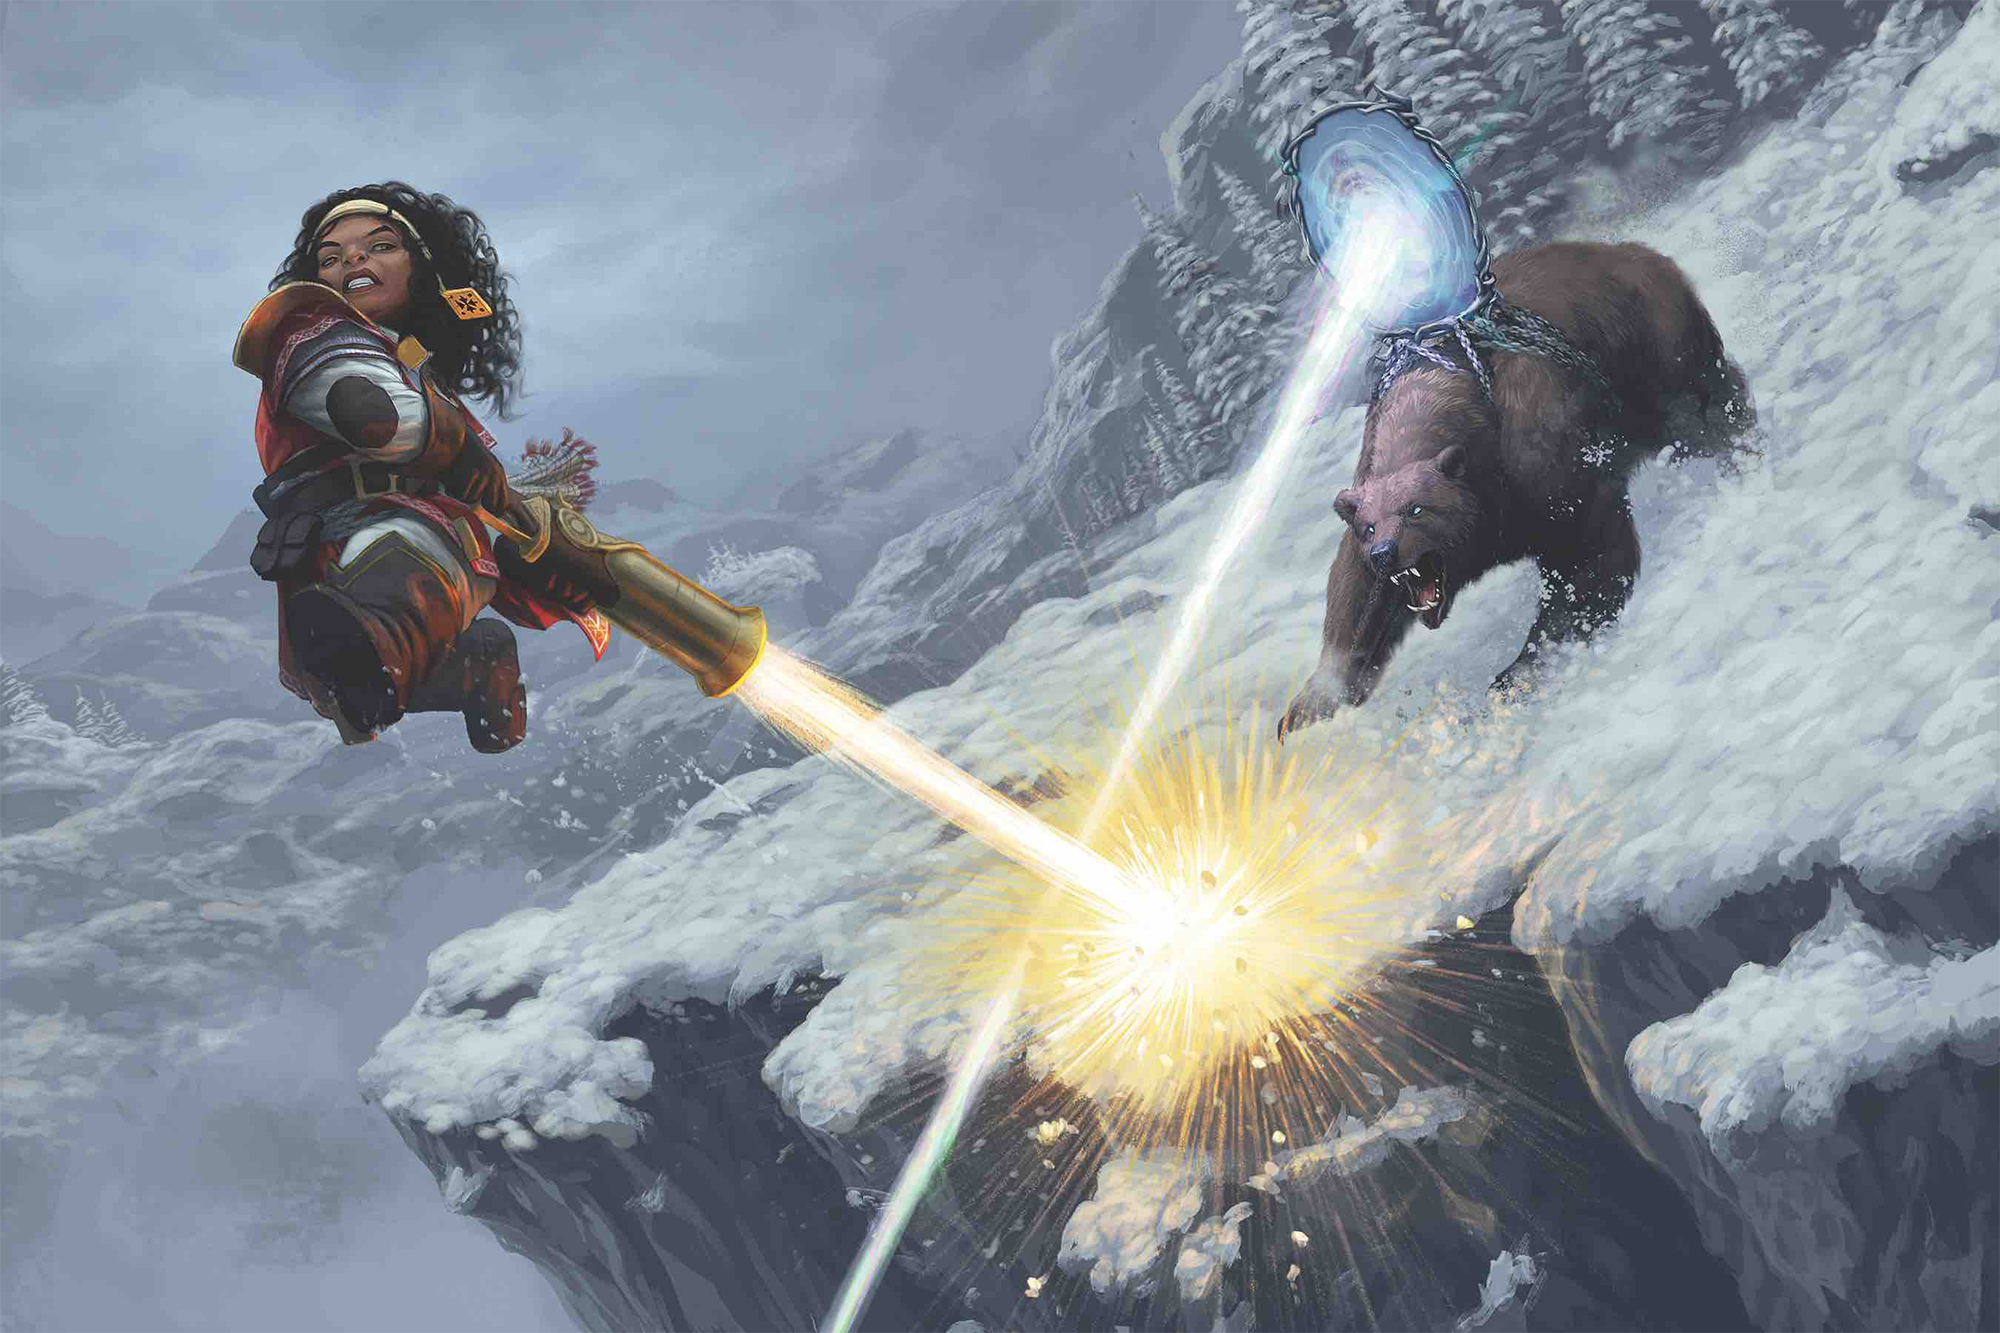 The iconic gunslinger leaps off the edge of a snowy cliff, propelled by a blast of her scattergun pointed at the ground. She barely dodges a blast of energy fired from a magical mirror strapped to a bear’s back